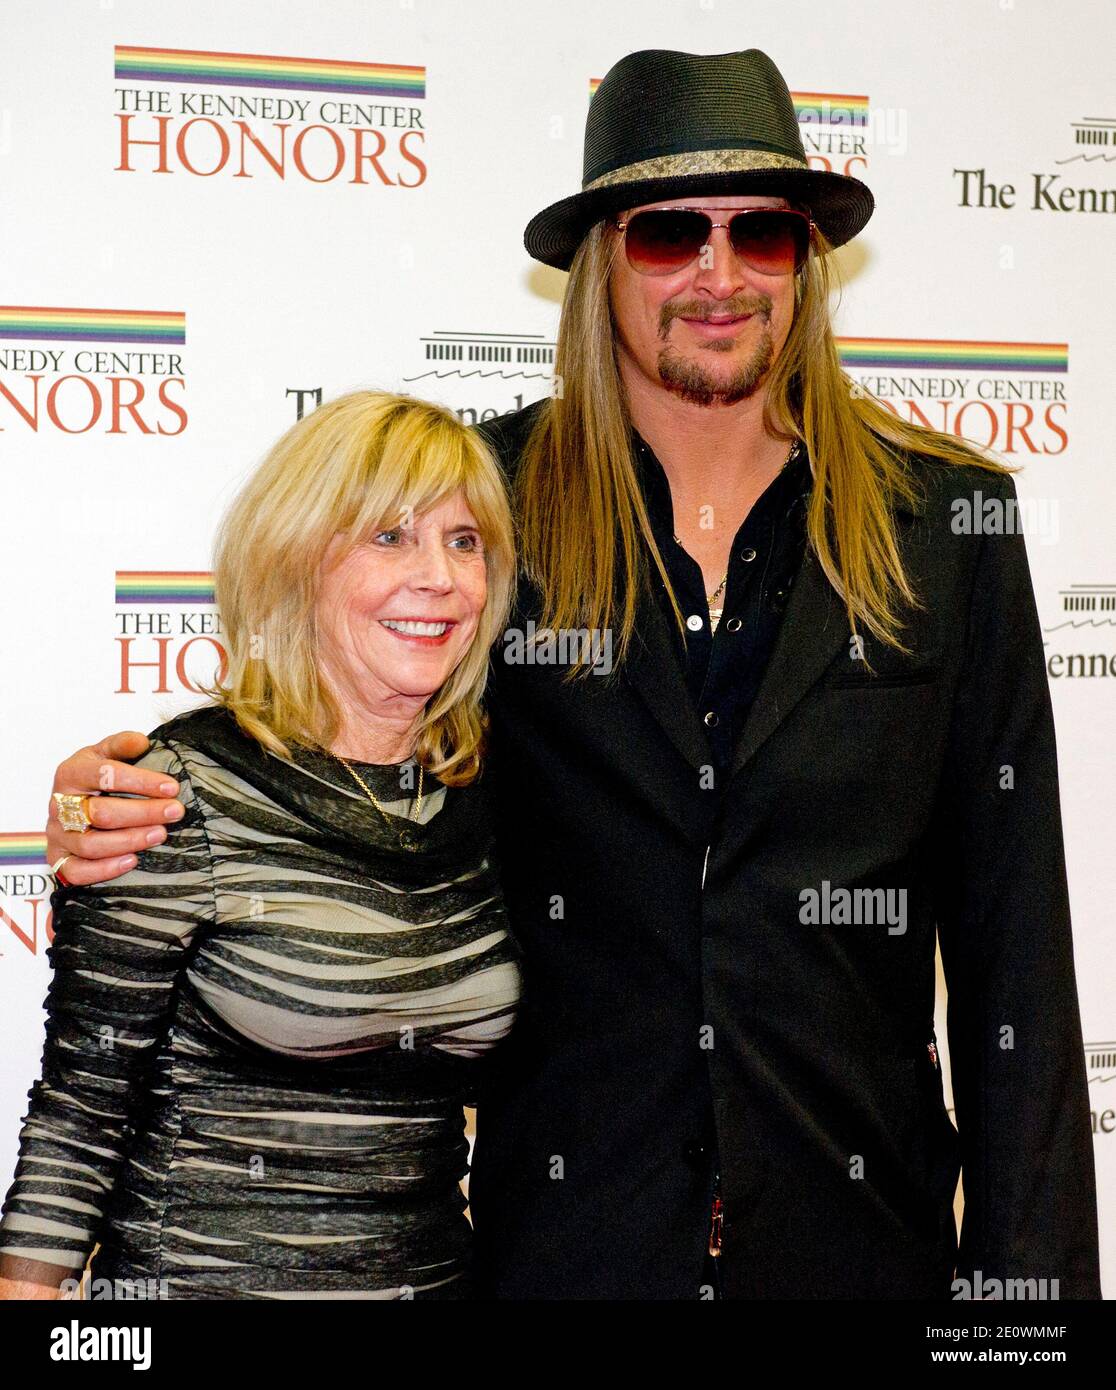 Robert 'Kid Rock' Ritchie and his Mom, Susan Ritchie, arrive for the formal Artist's Dinner honoring the recipients of the 2012 Kennedy Center Honors hosted by United States Secretary of State Hillary Rodham Clinton at the U.S. Department of State in Washington, DC, USA, on December 01, 2012. The 2012 honorees are Buddy Guy, actor Dustin Hoffman, late-night host David Letterman, dancer Natalia Makarova, and the British rock band Led Zeppelin. Photo by Ron Sachs/ABACAPRESS.COM Stock Photo